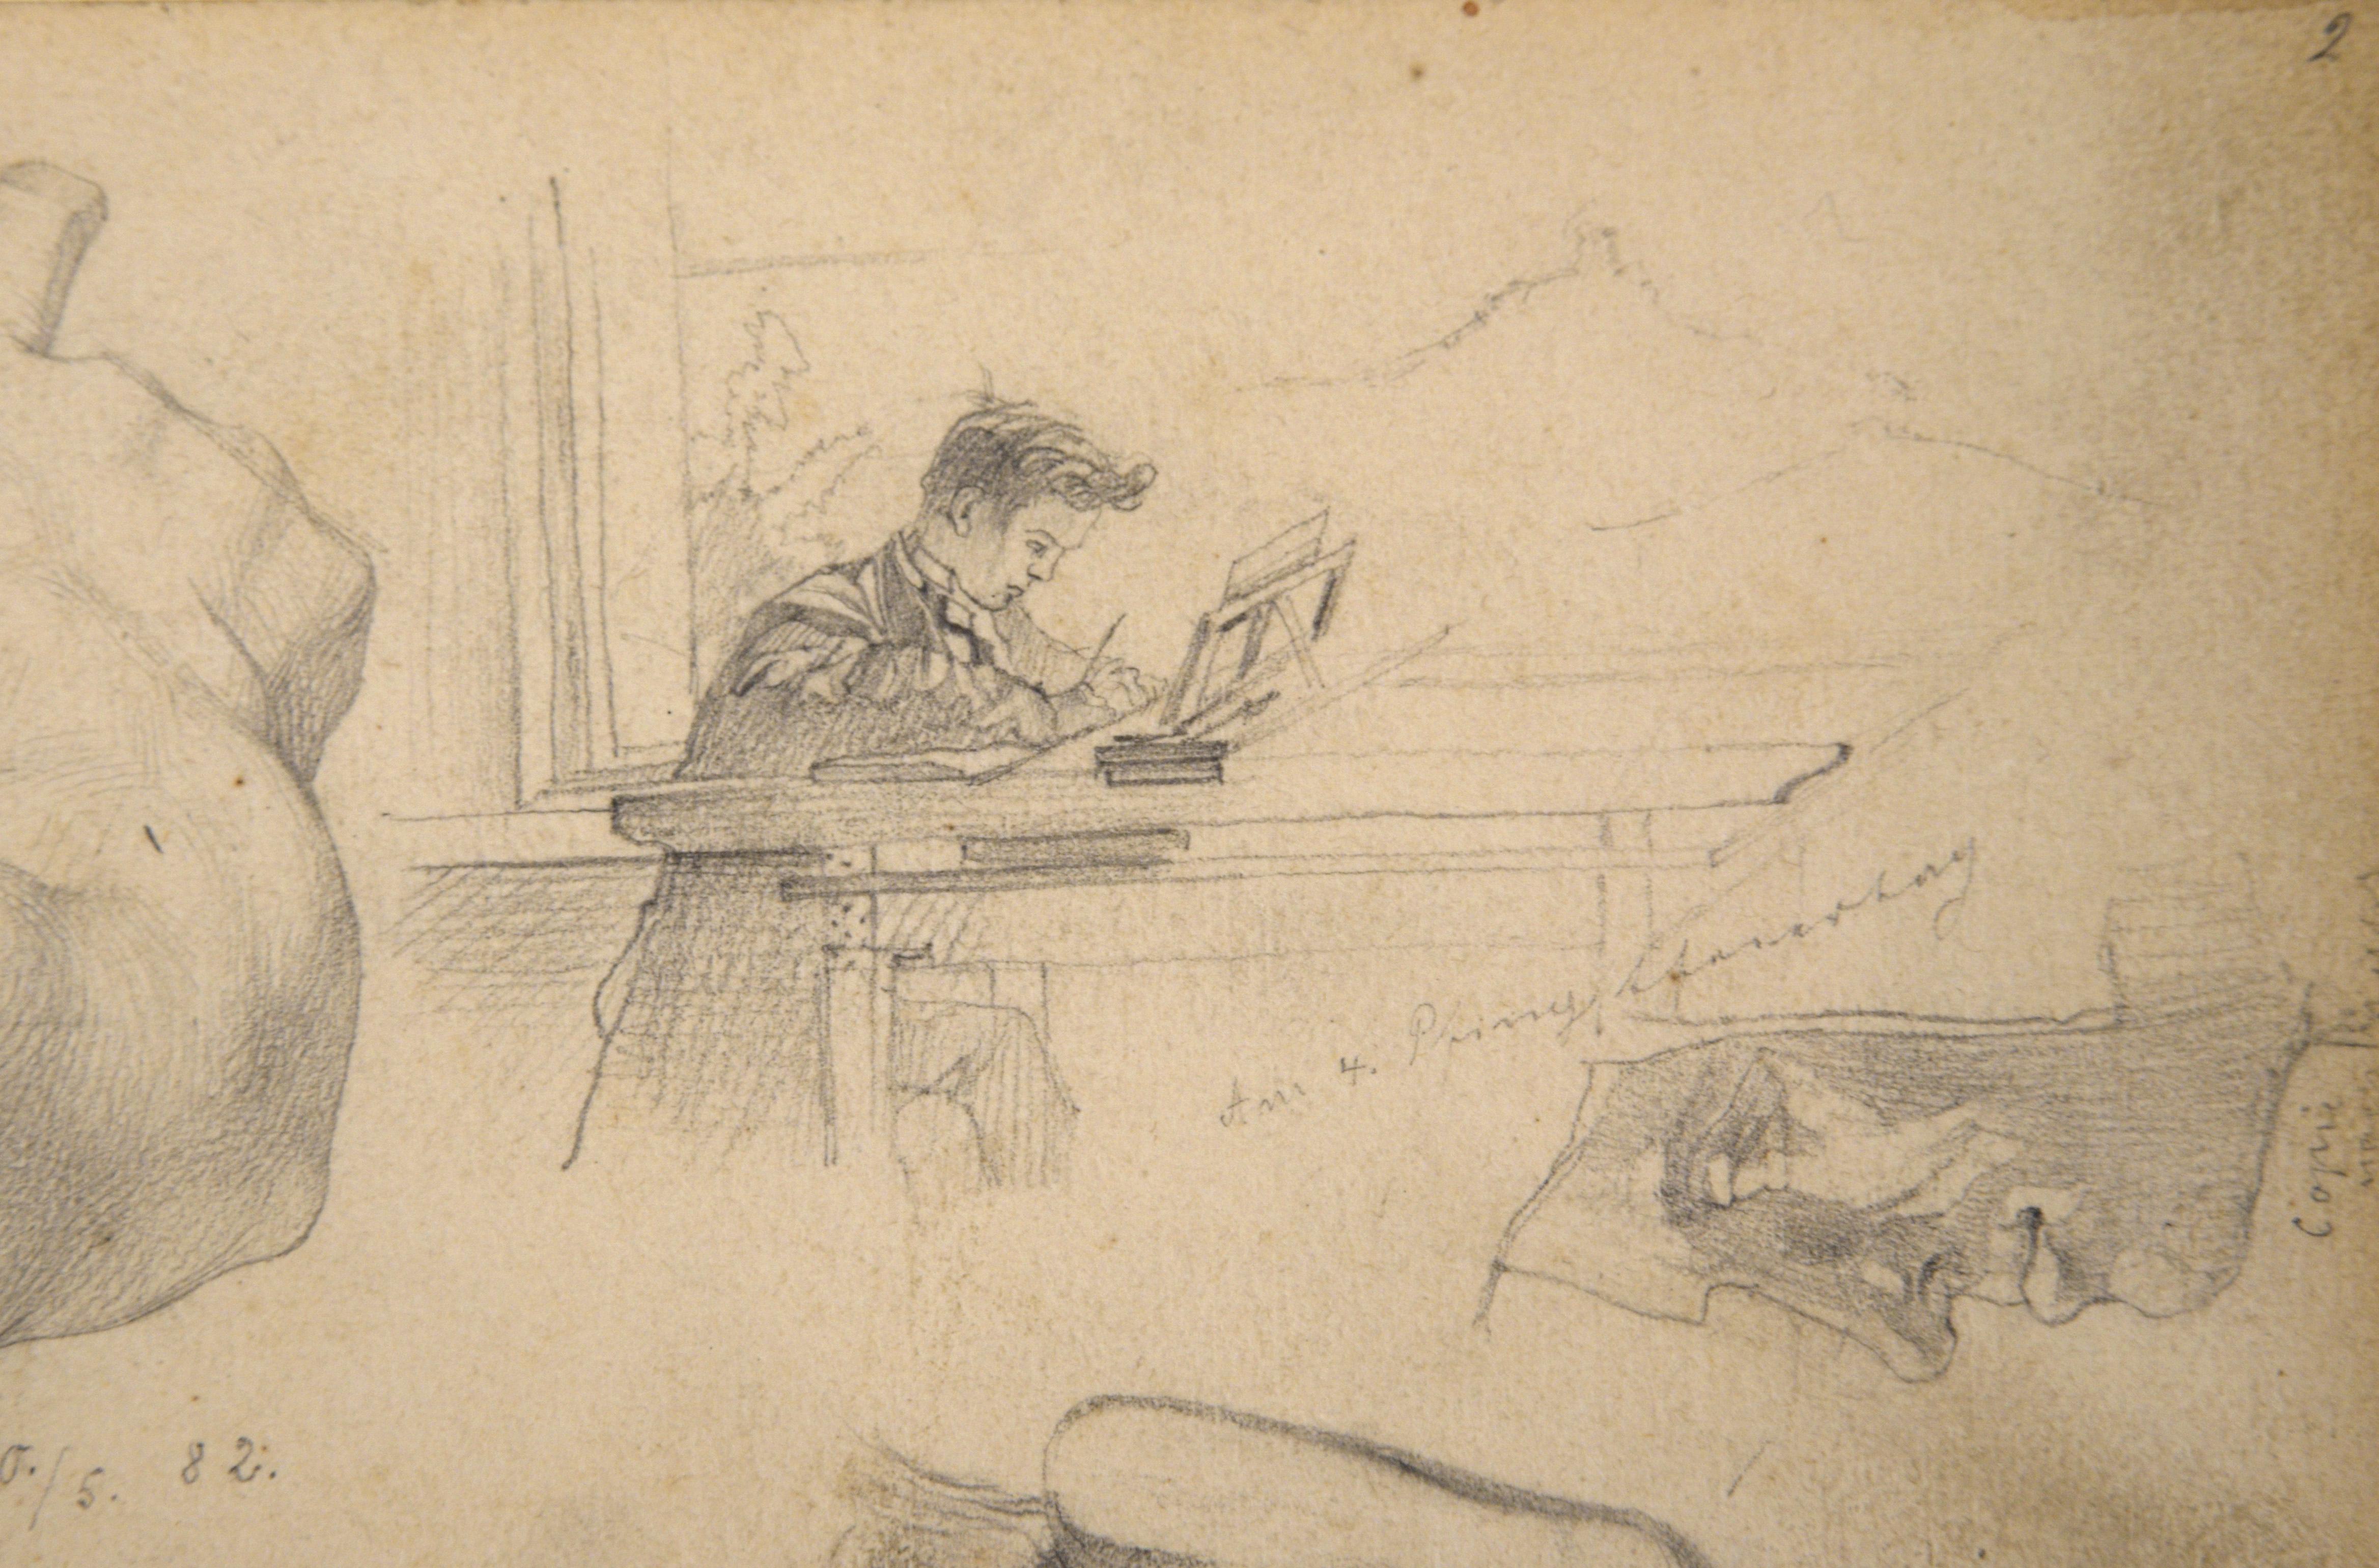 Sketchbook Page with Figures and Anatomical Details in Pencil on Paper

Drawings of a man at a desk and other figurative sections by an unknown artist (19th Century). On the left side of the page, there is a shoulder, arm, and hand, pointing away